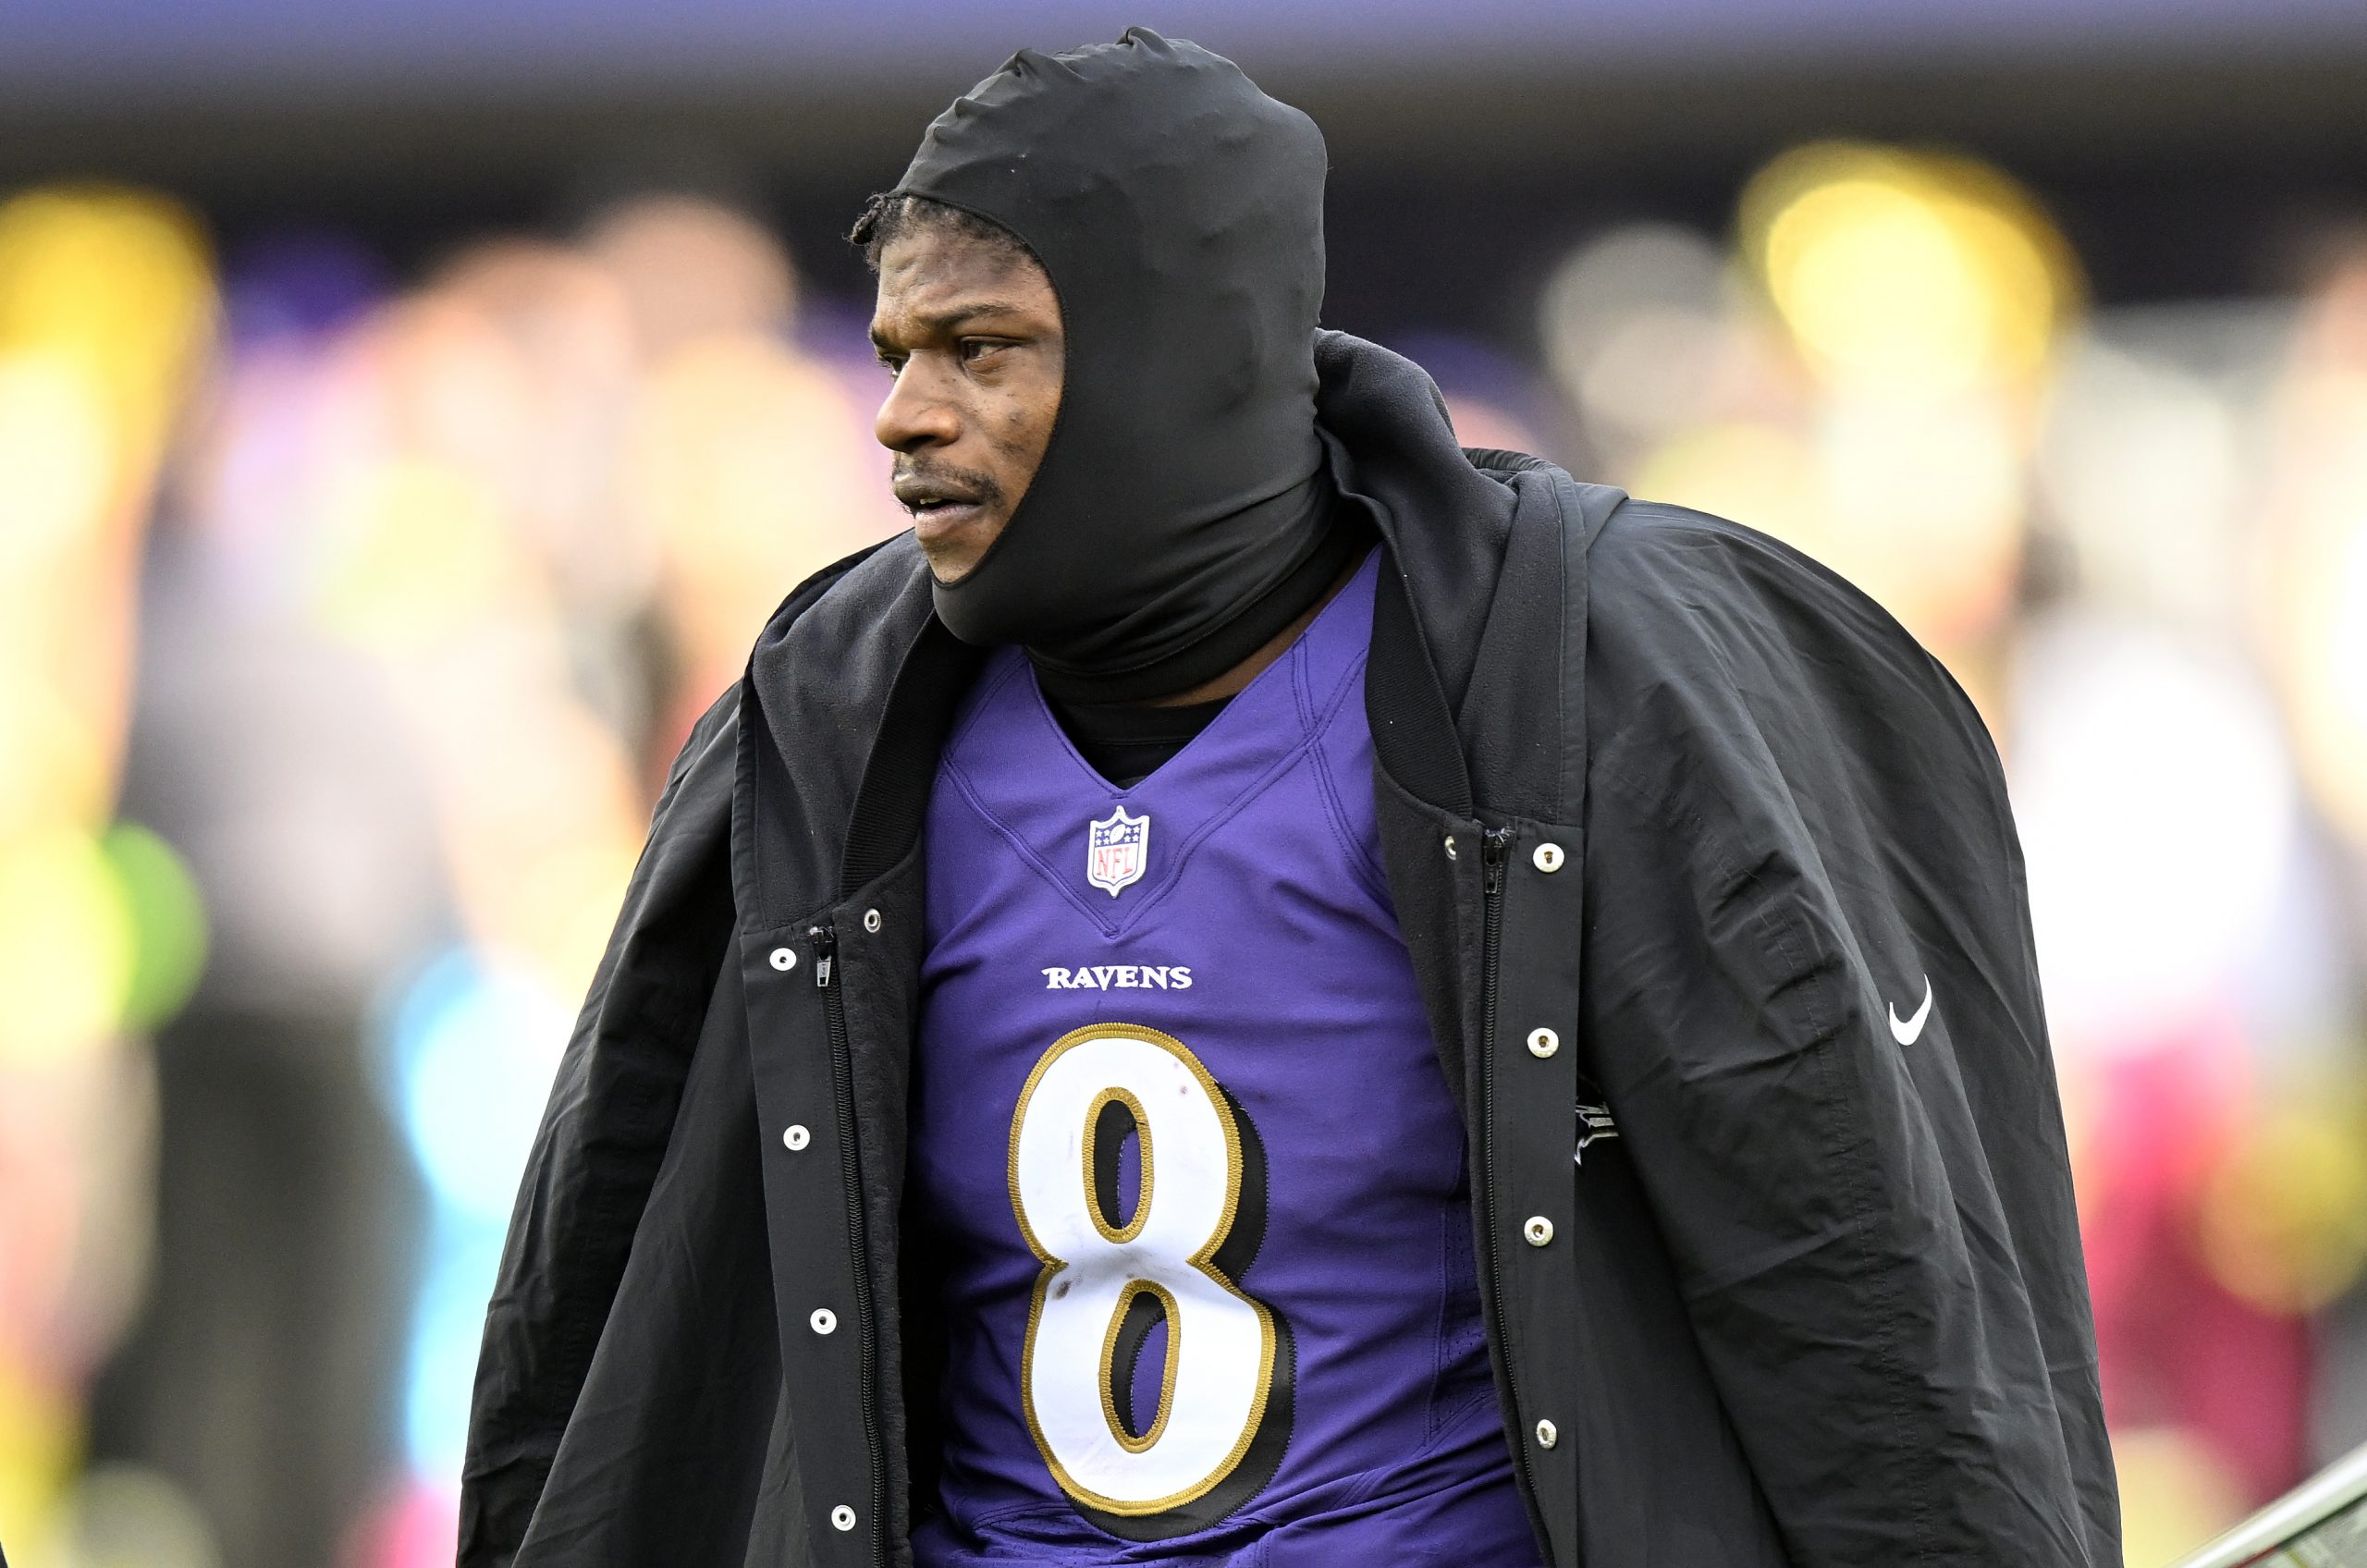 NFL Lamar Jackson #8 of the Baltimore Ravens watches the game against the Denver Broncos at M&T...